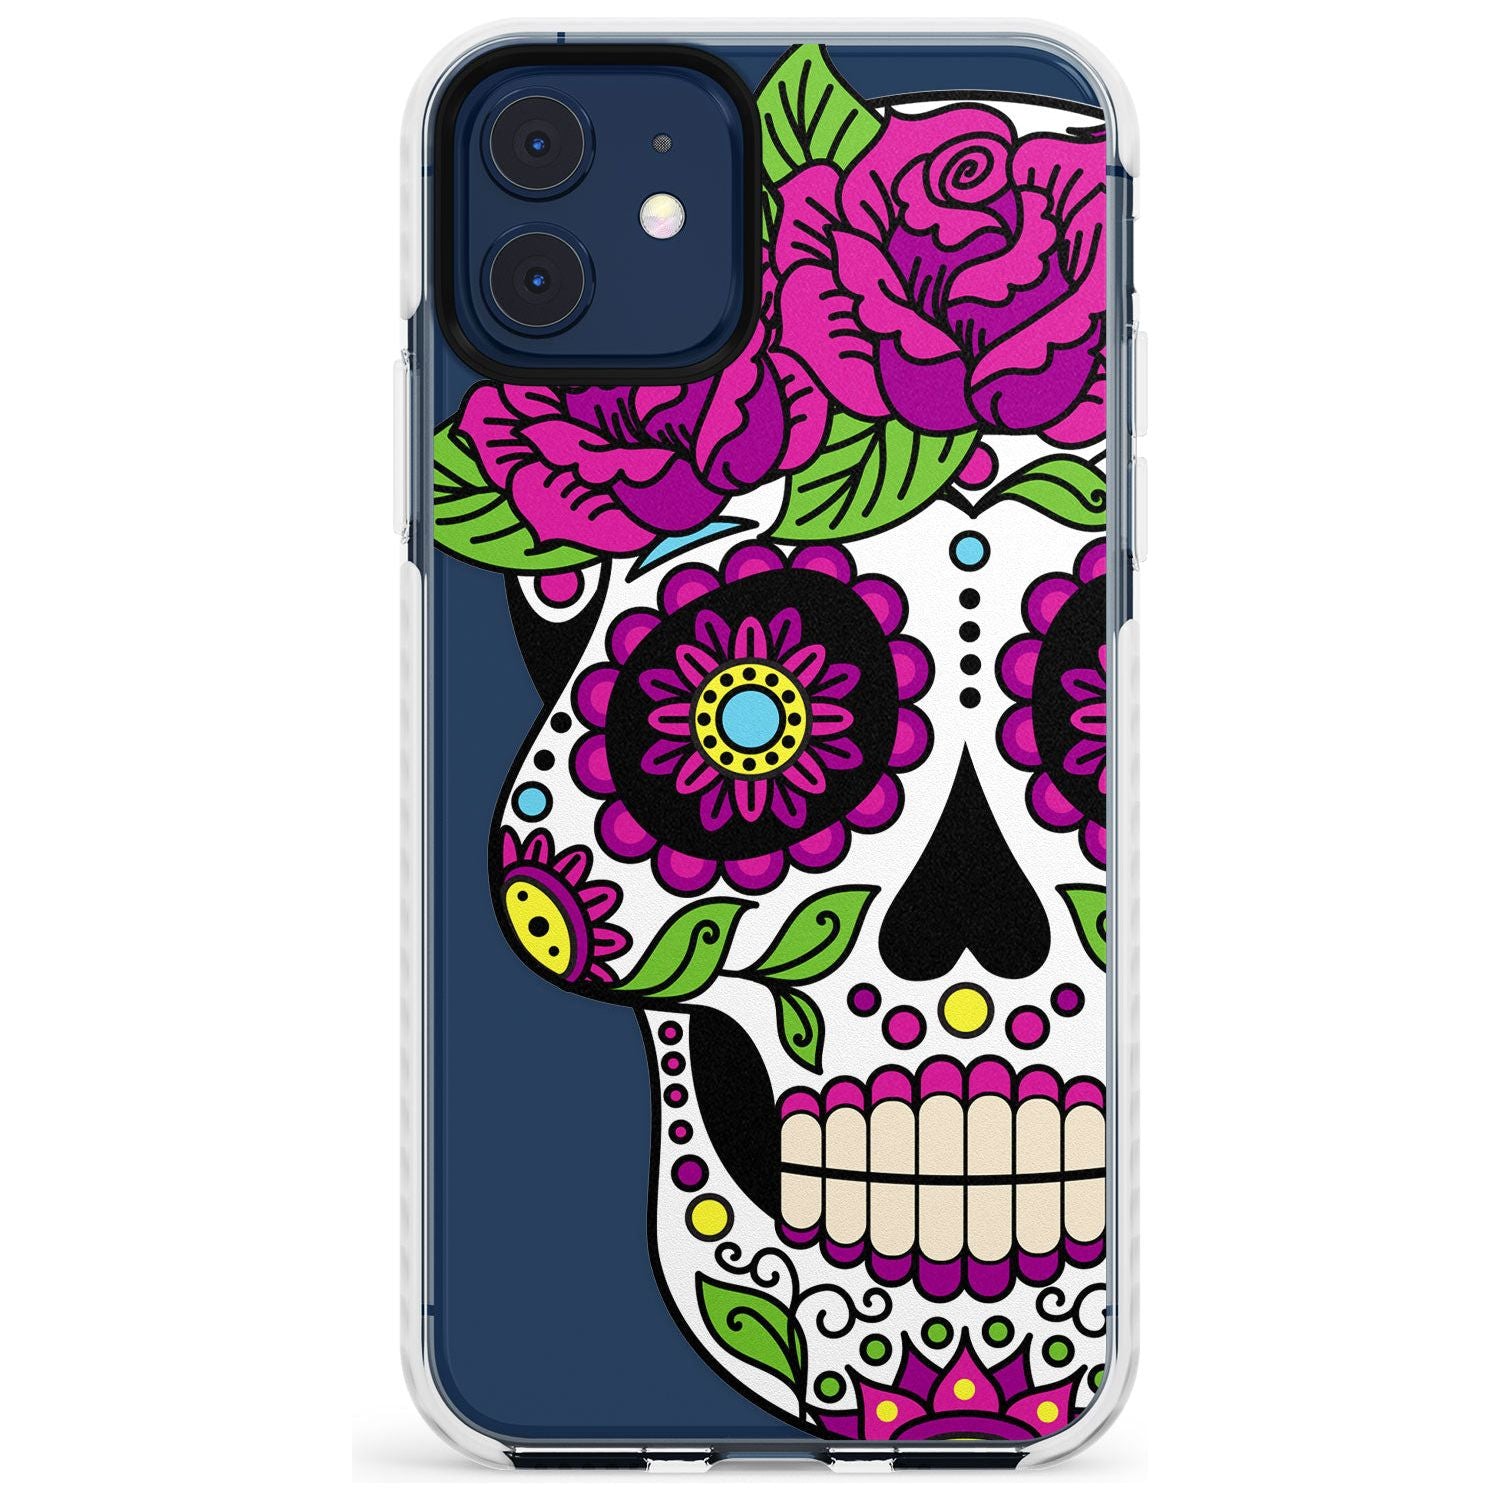 Purple Floral Sugar Skull Impact Phone Case for iPhone 11